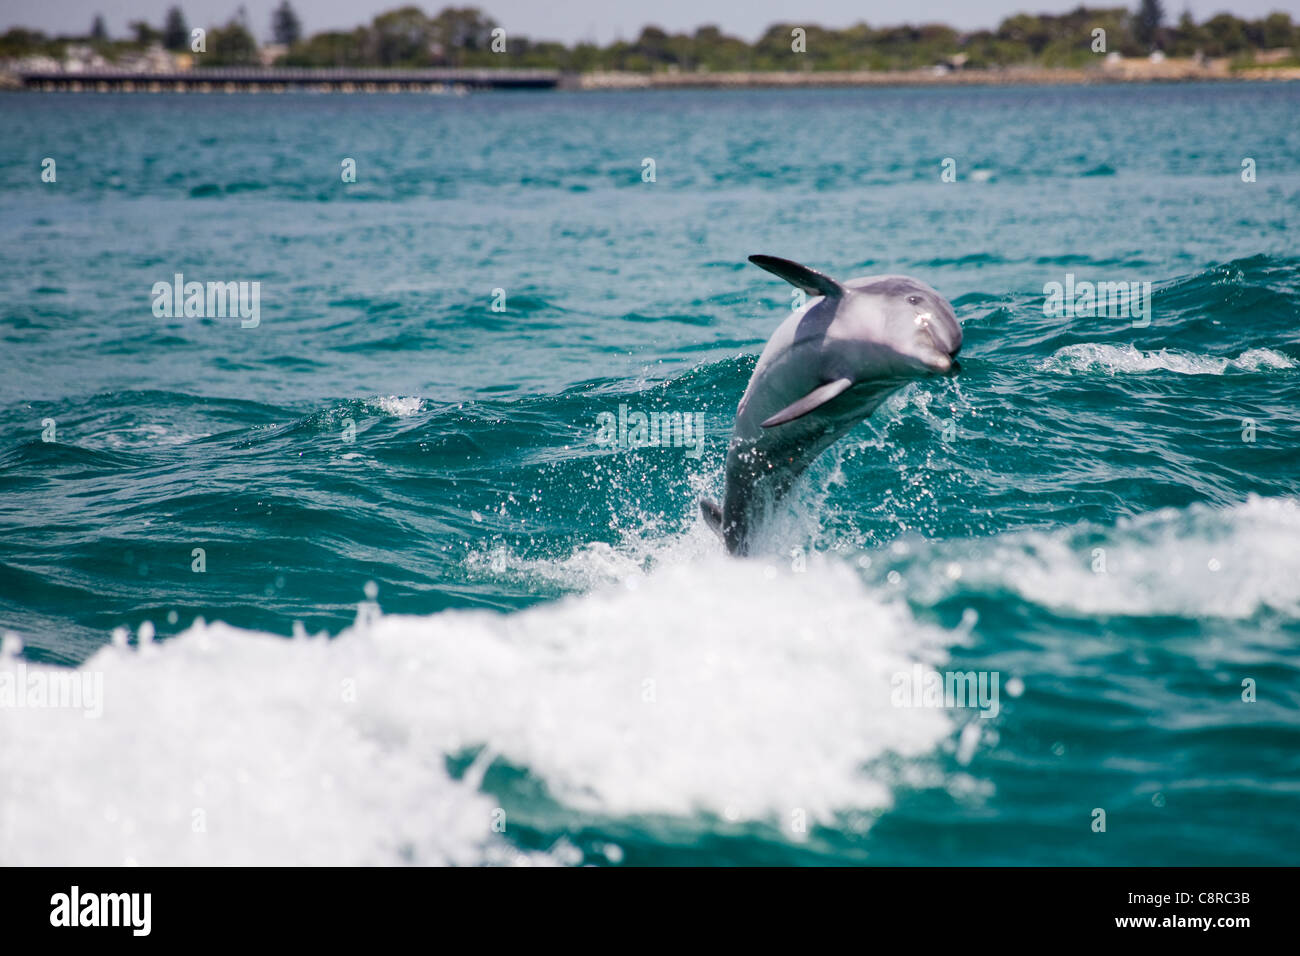 Dolphins leaping in the wake of a boat Stock Photo